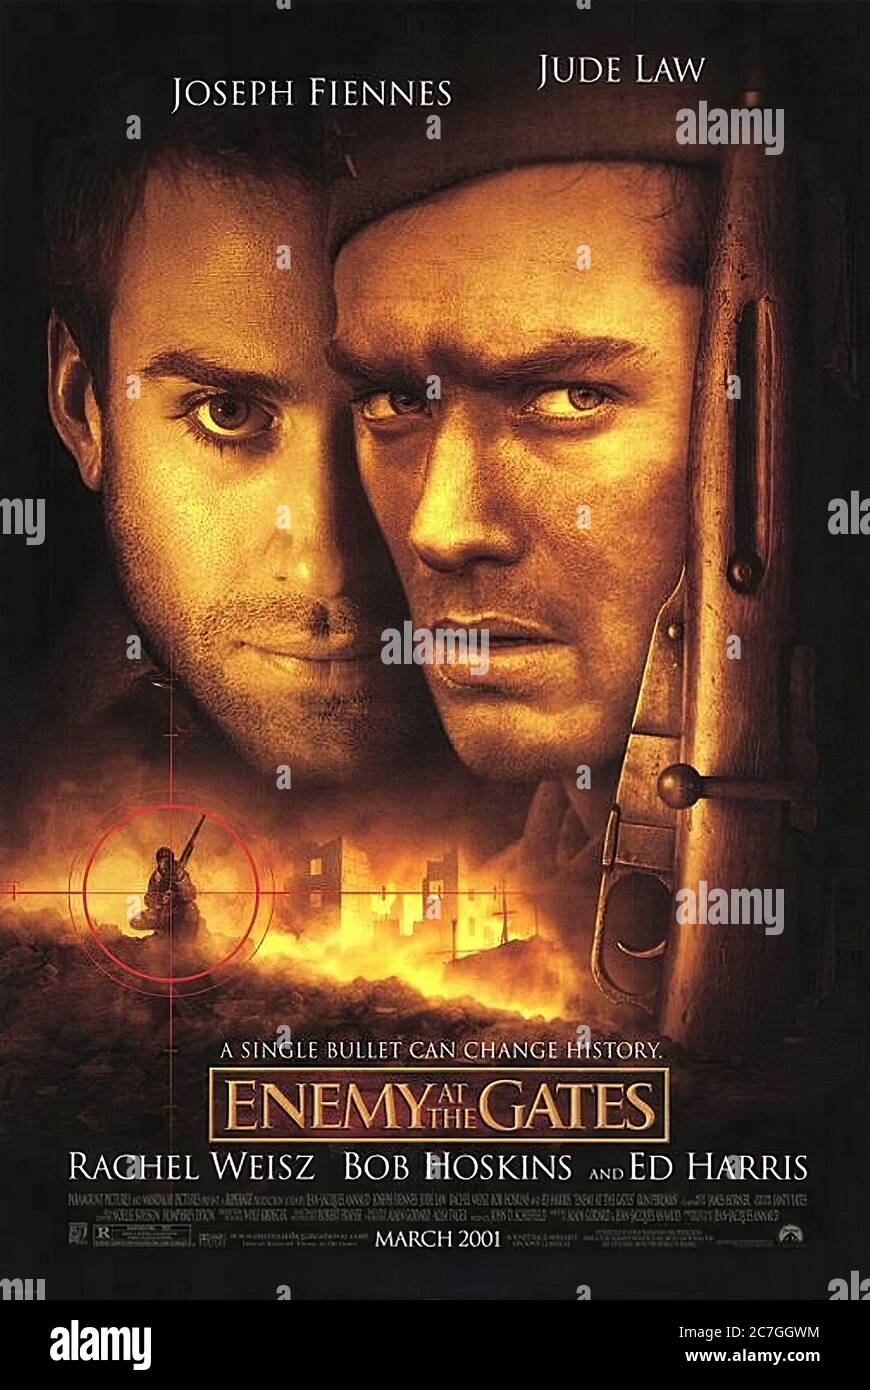 Enemy at the Gates - Movie Poster Stock Photo